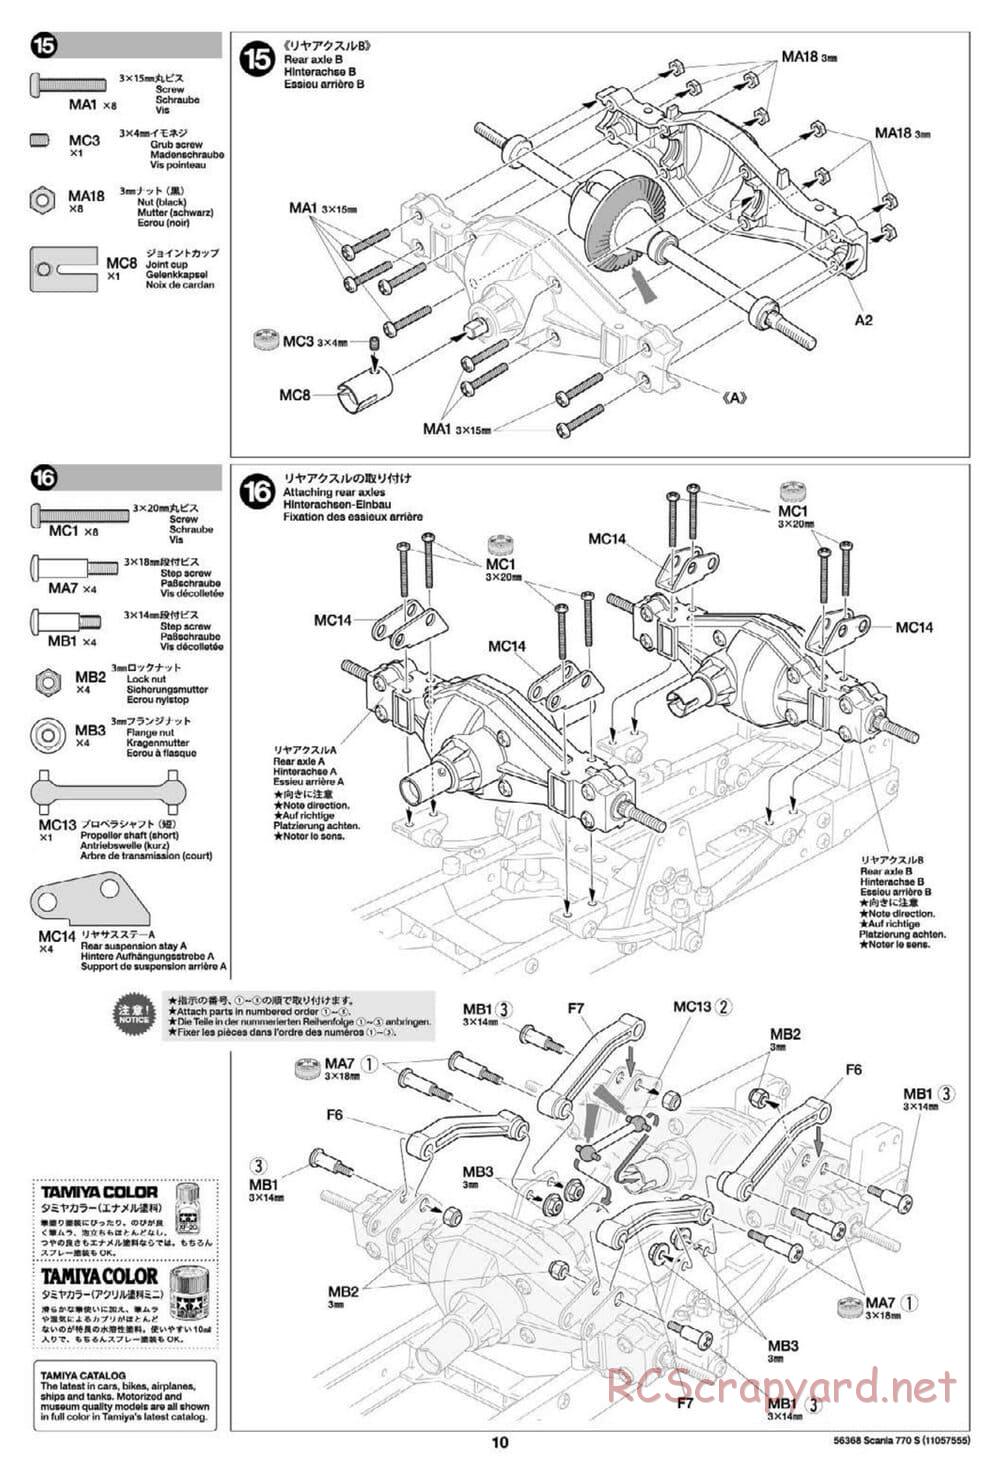 Tamiya - Scania 770S 6x4 Tractor Truck Chassis - Manual - Page 10